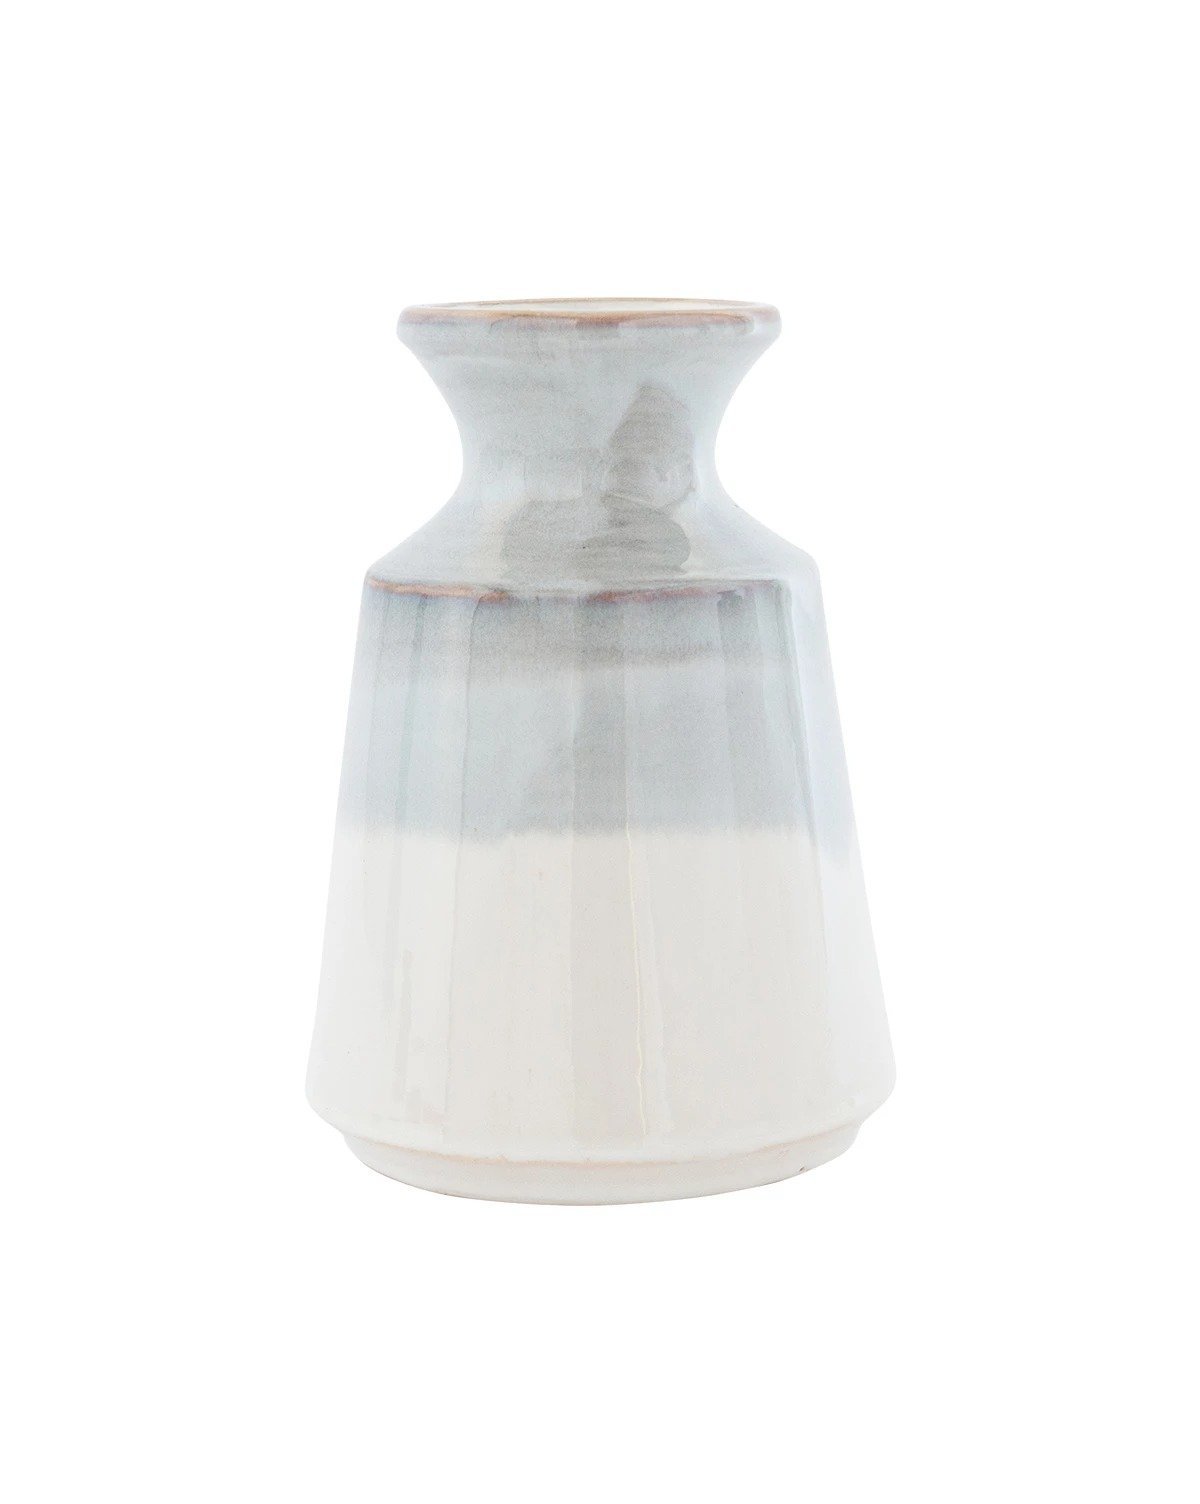 GRAY DIPPED VASE - SMALL - Image 0